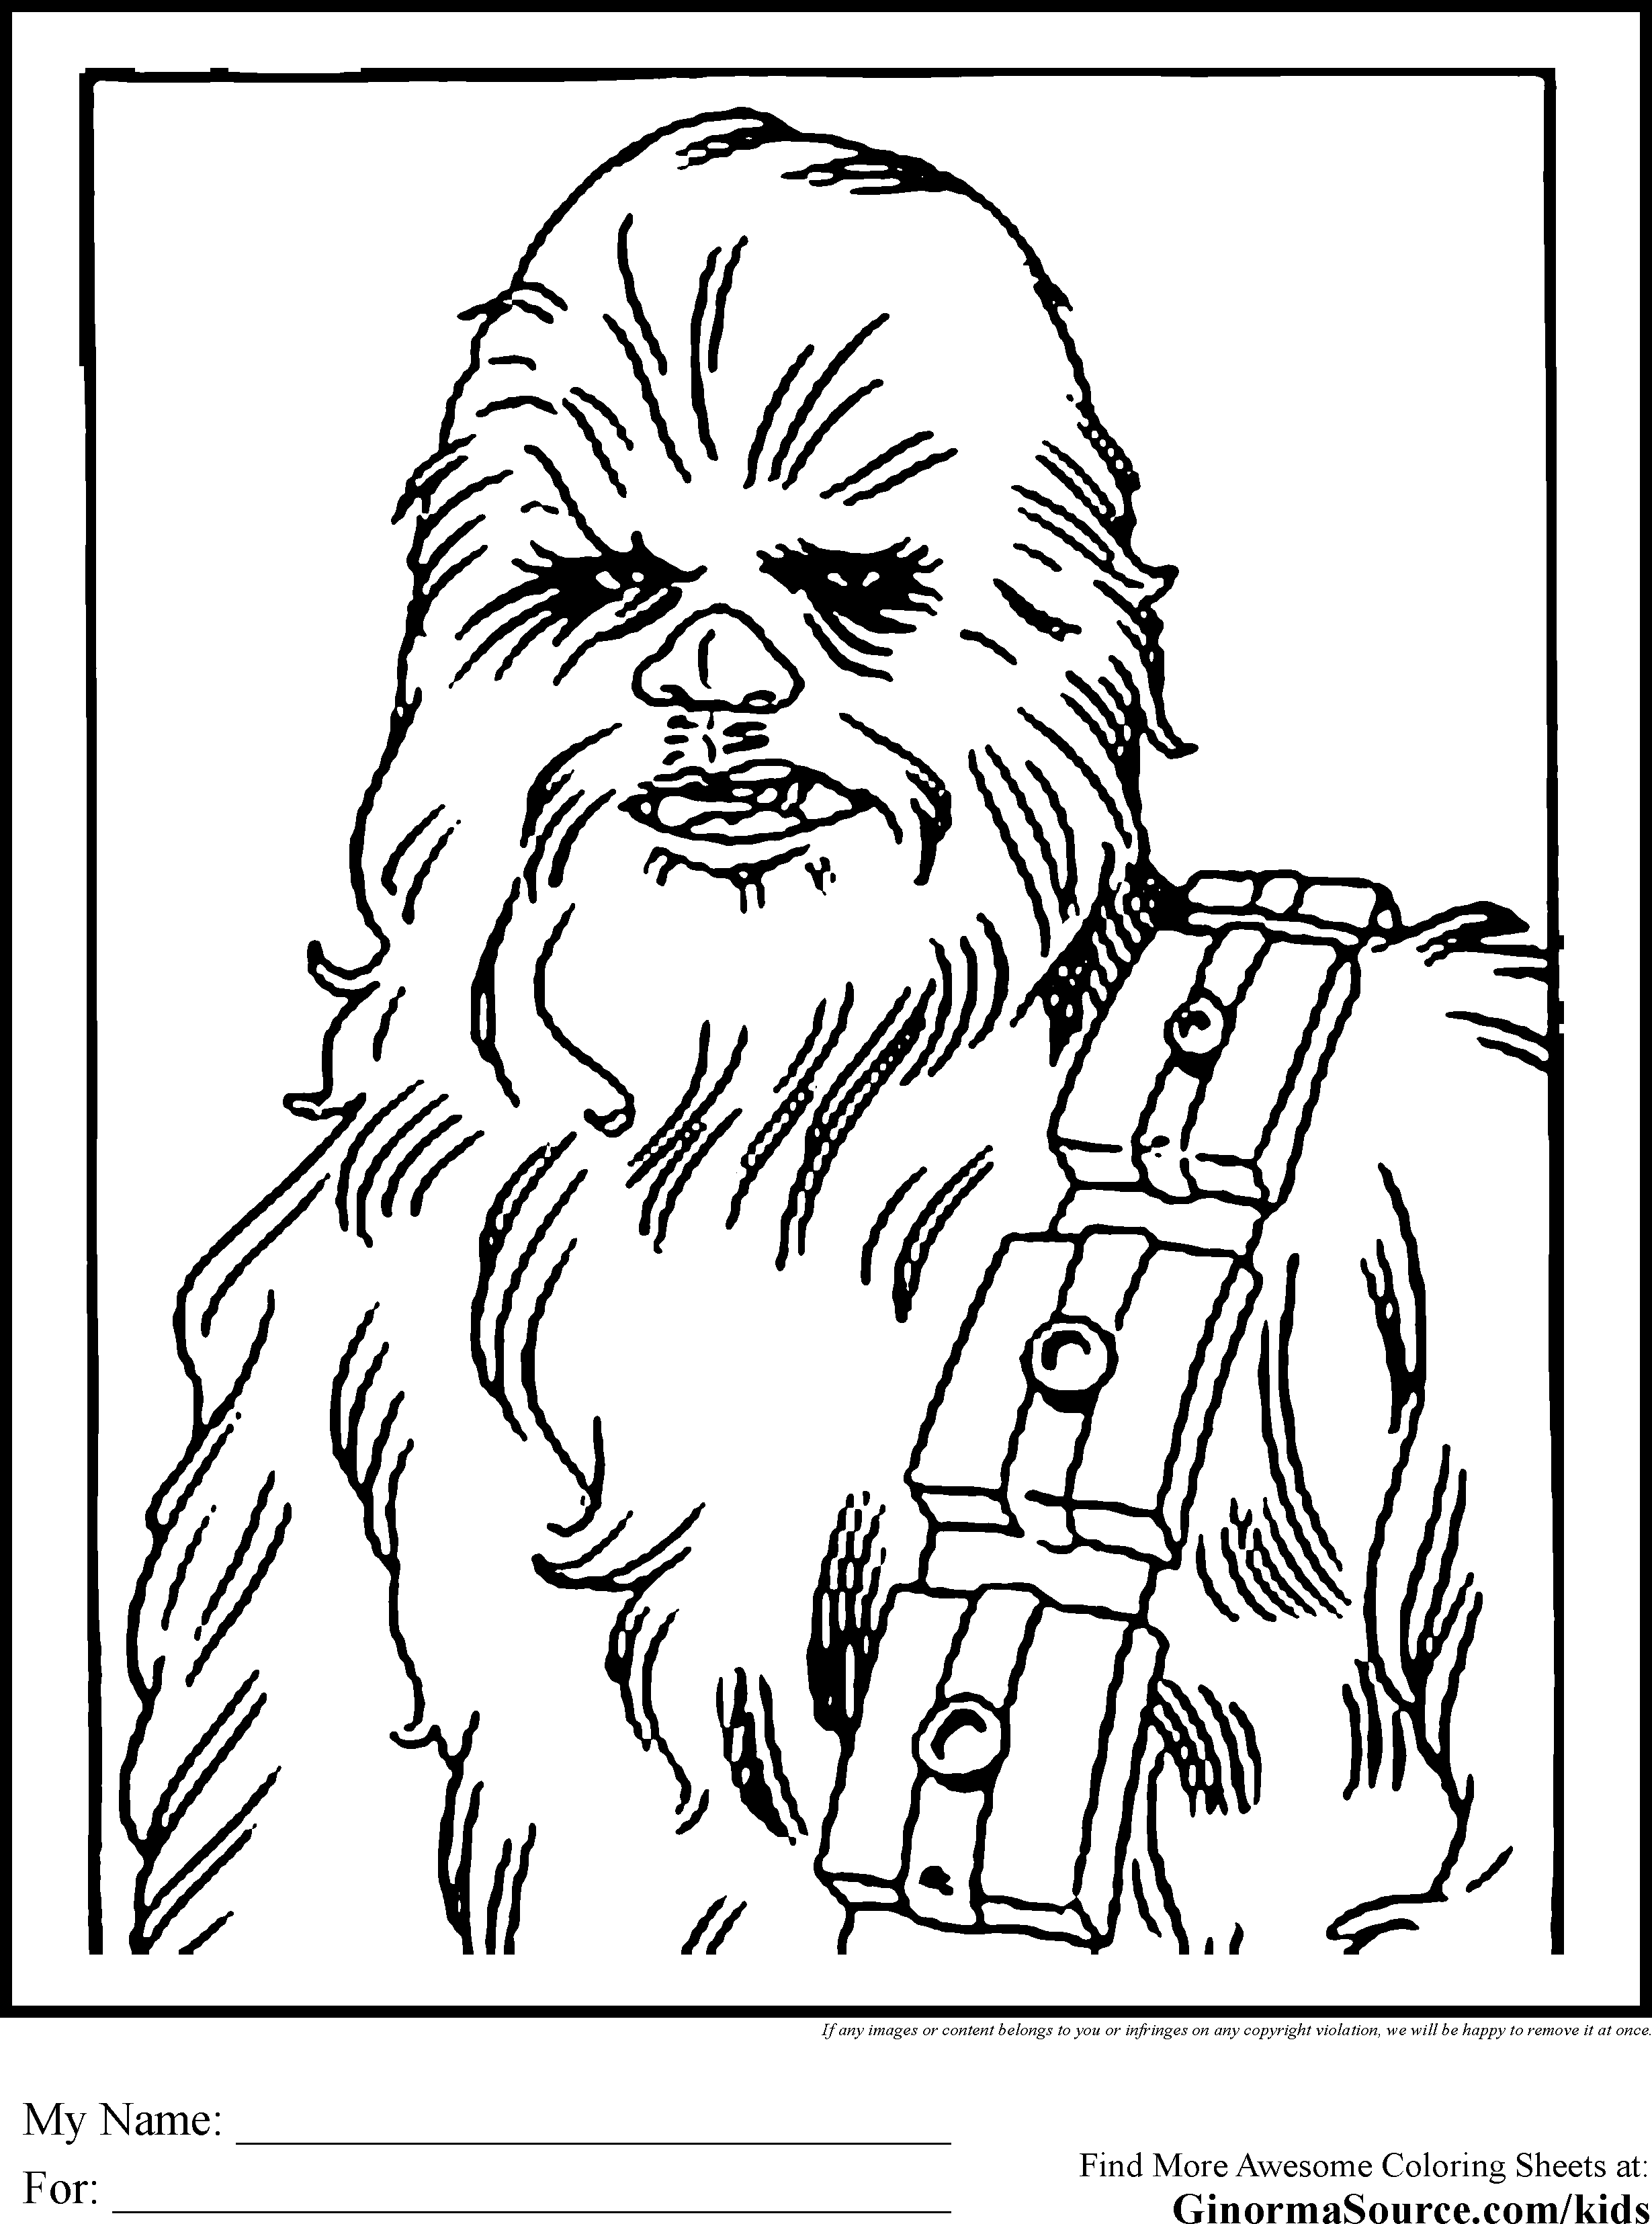 Free Chewbacca Coloring Page Download Free Chewbacca Coloring Page Png 